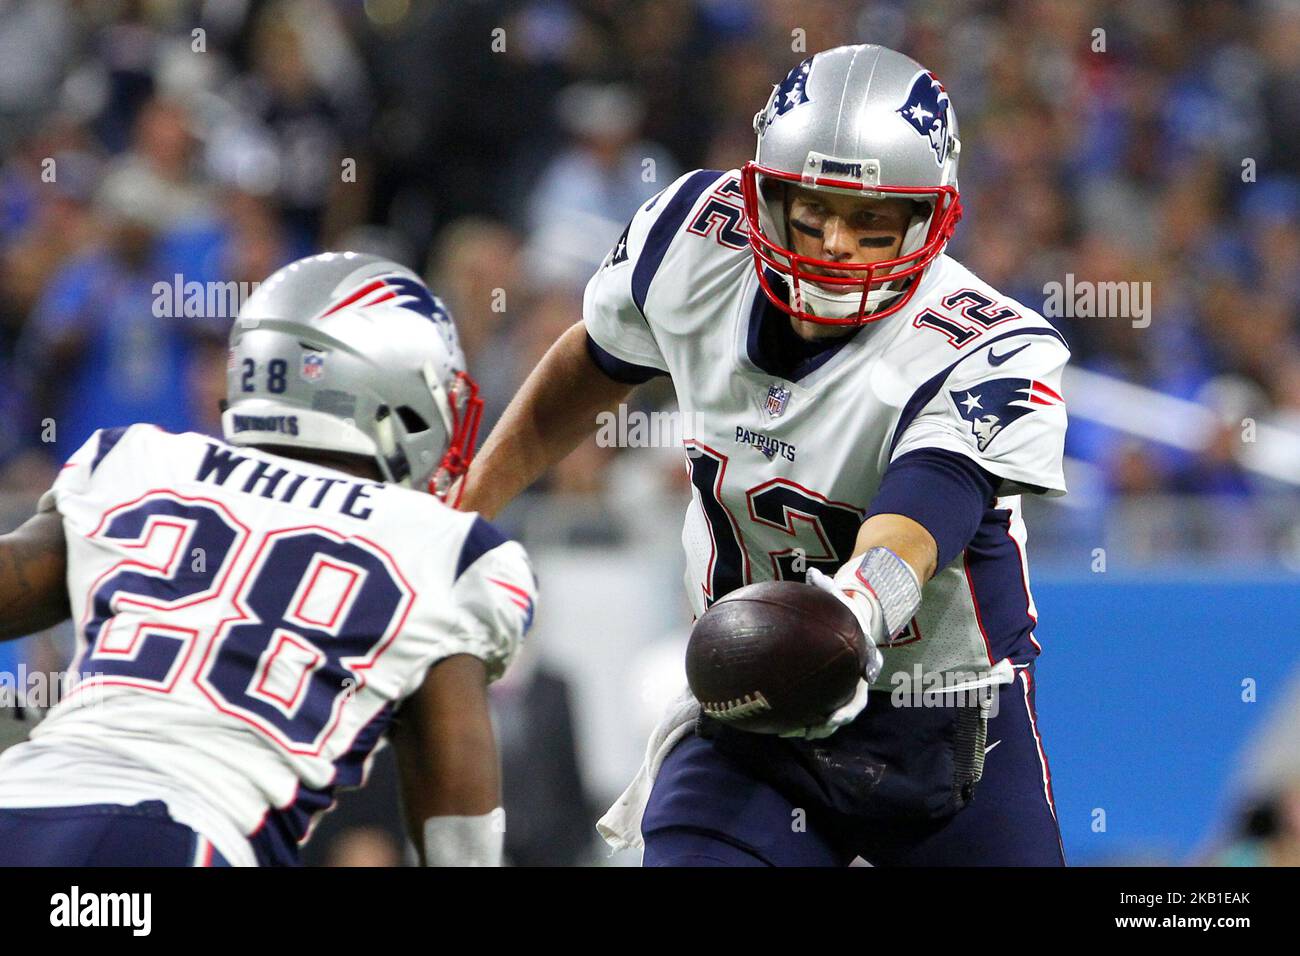 New England Patriots quarterback Tom Brady #12 prepares to hand off the ball to New England Patriots running back James White #28 during the first half of an NFL football game against the Detroit Lions in Detroit, Michigan USA, on Sunday, September 23, 2018. (Photo by Amy Lemus/NurPhoto) Stock Photo